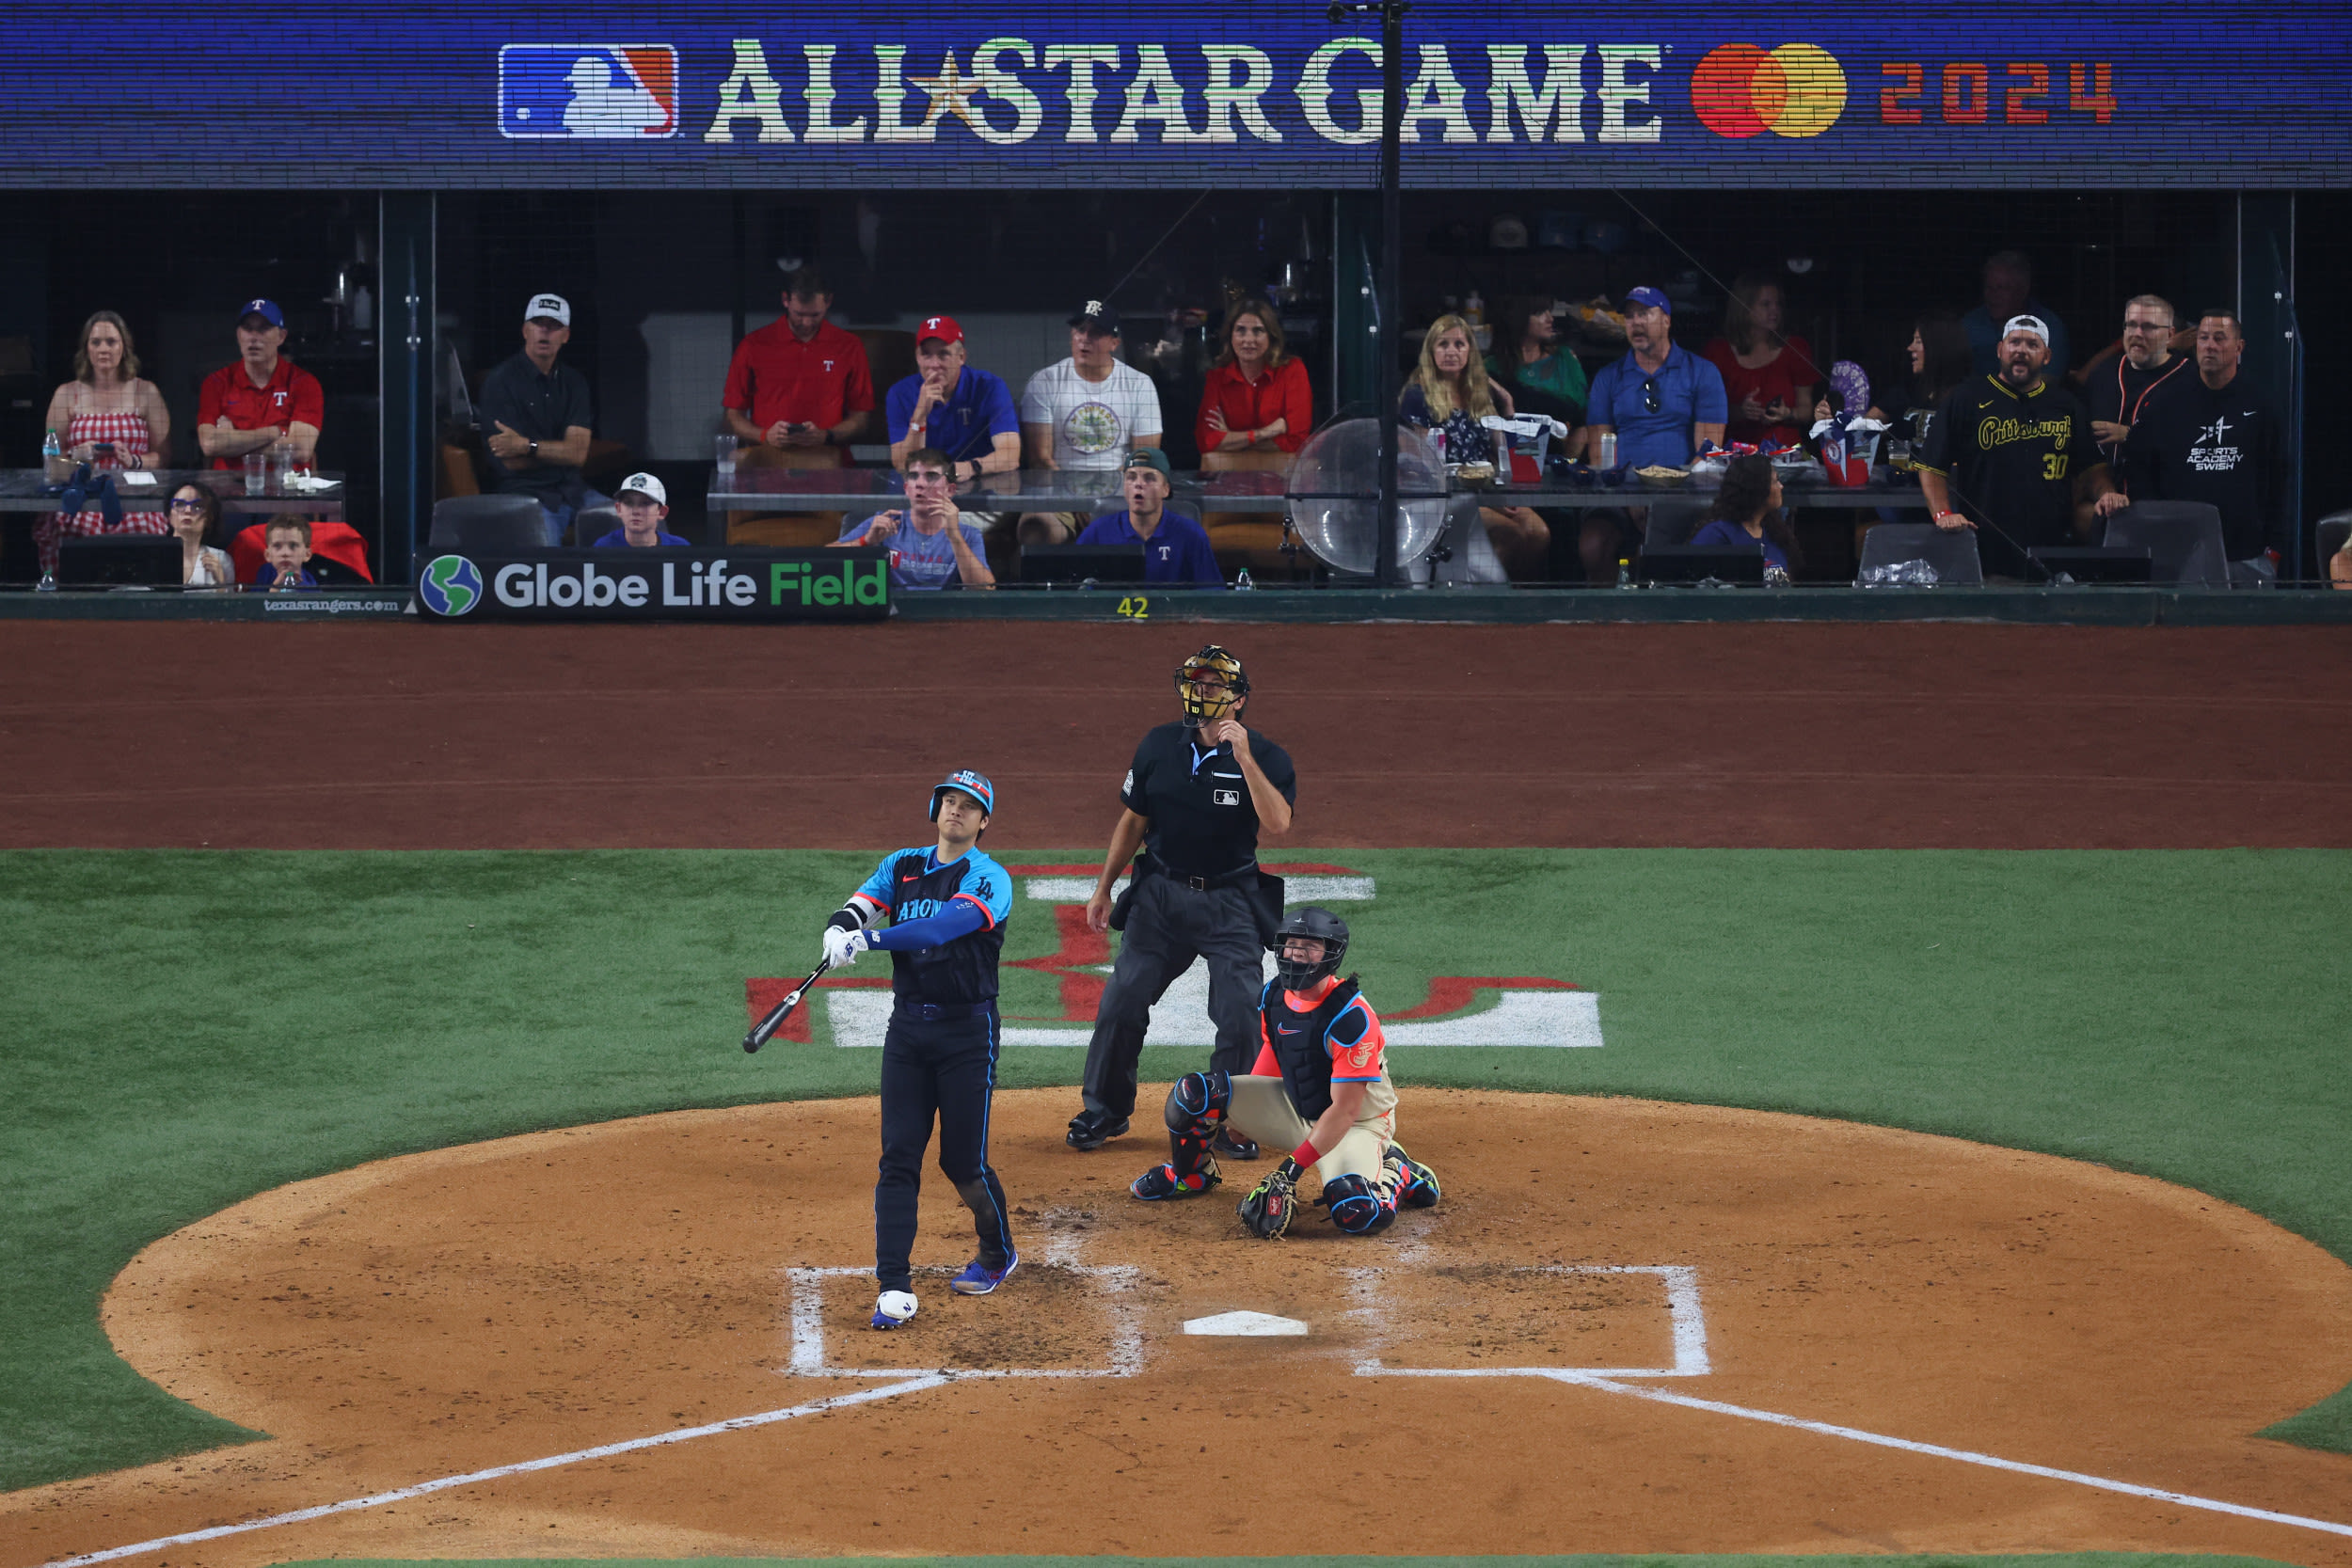 MLB All-Star Game Results: Winner, MVP, Highlights and More